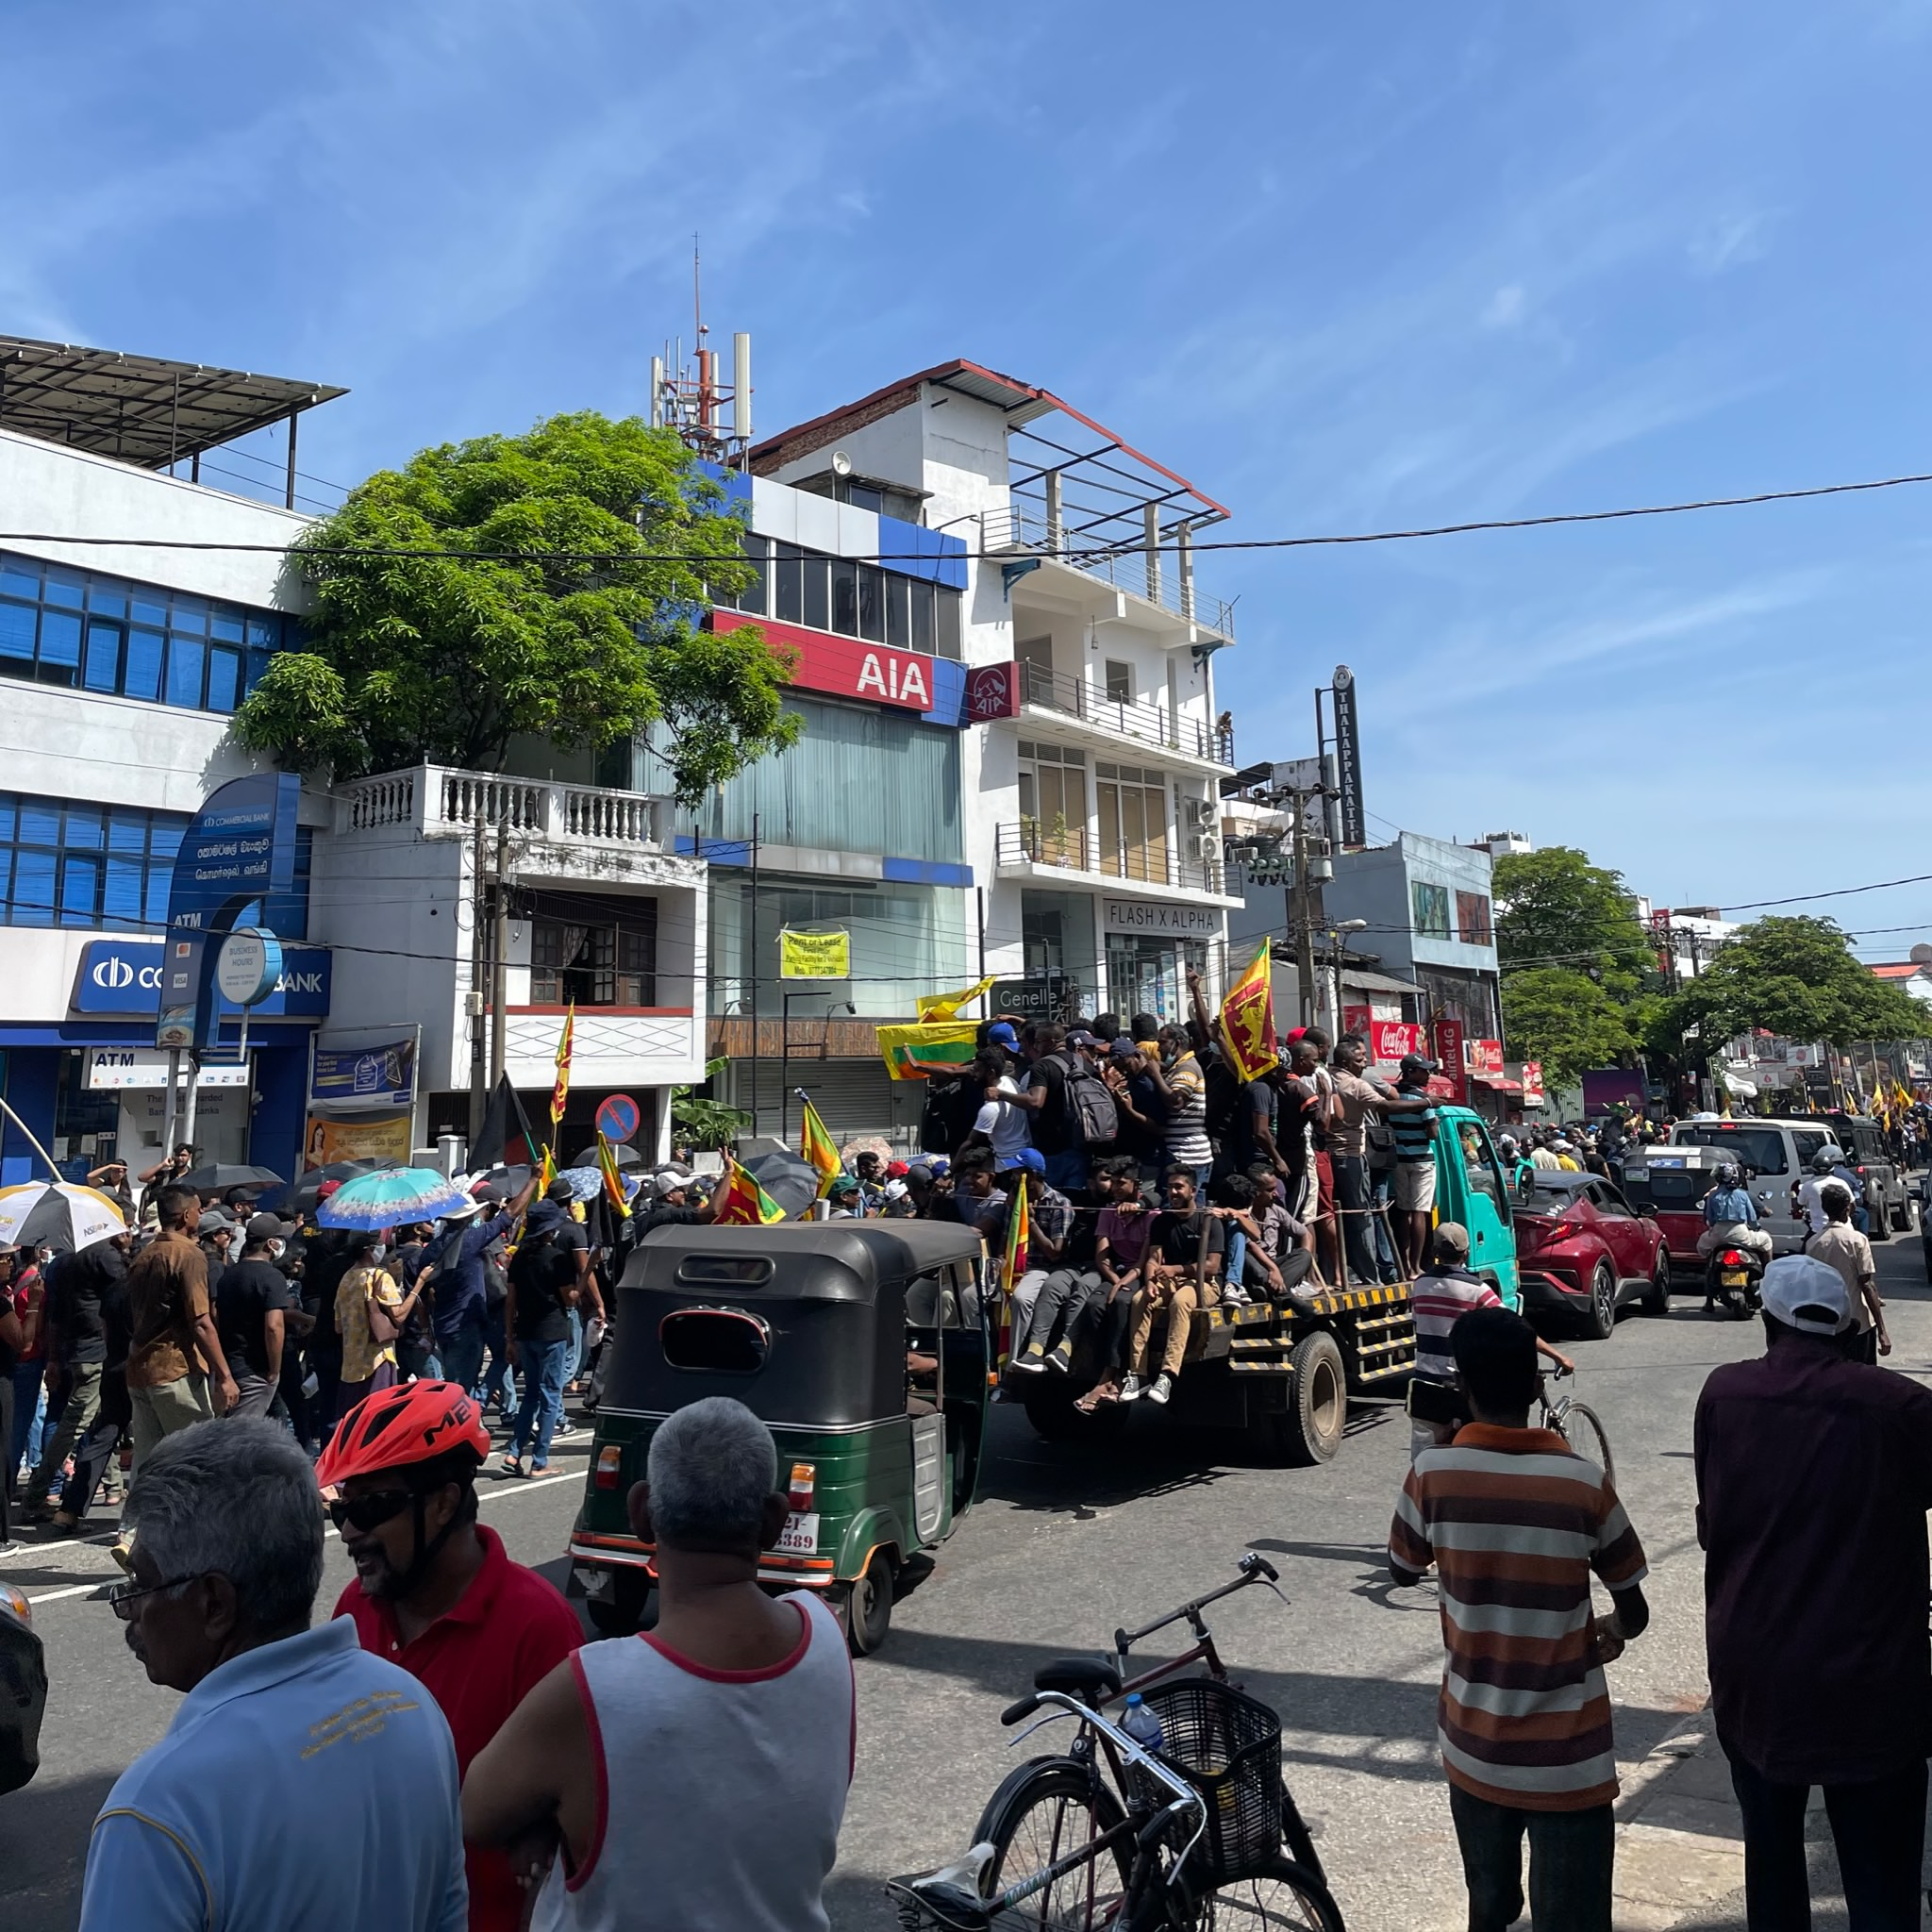 Protestors at Hotel Road Junction, Mount Lavinia: predominantly university students march, chanting “Go home, Gota!”, to cheers from the crowds watching on the sidelines. 09 July 2022. Photos by Yudhanjaya Wijeratne.